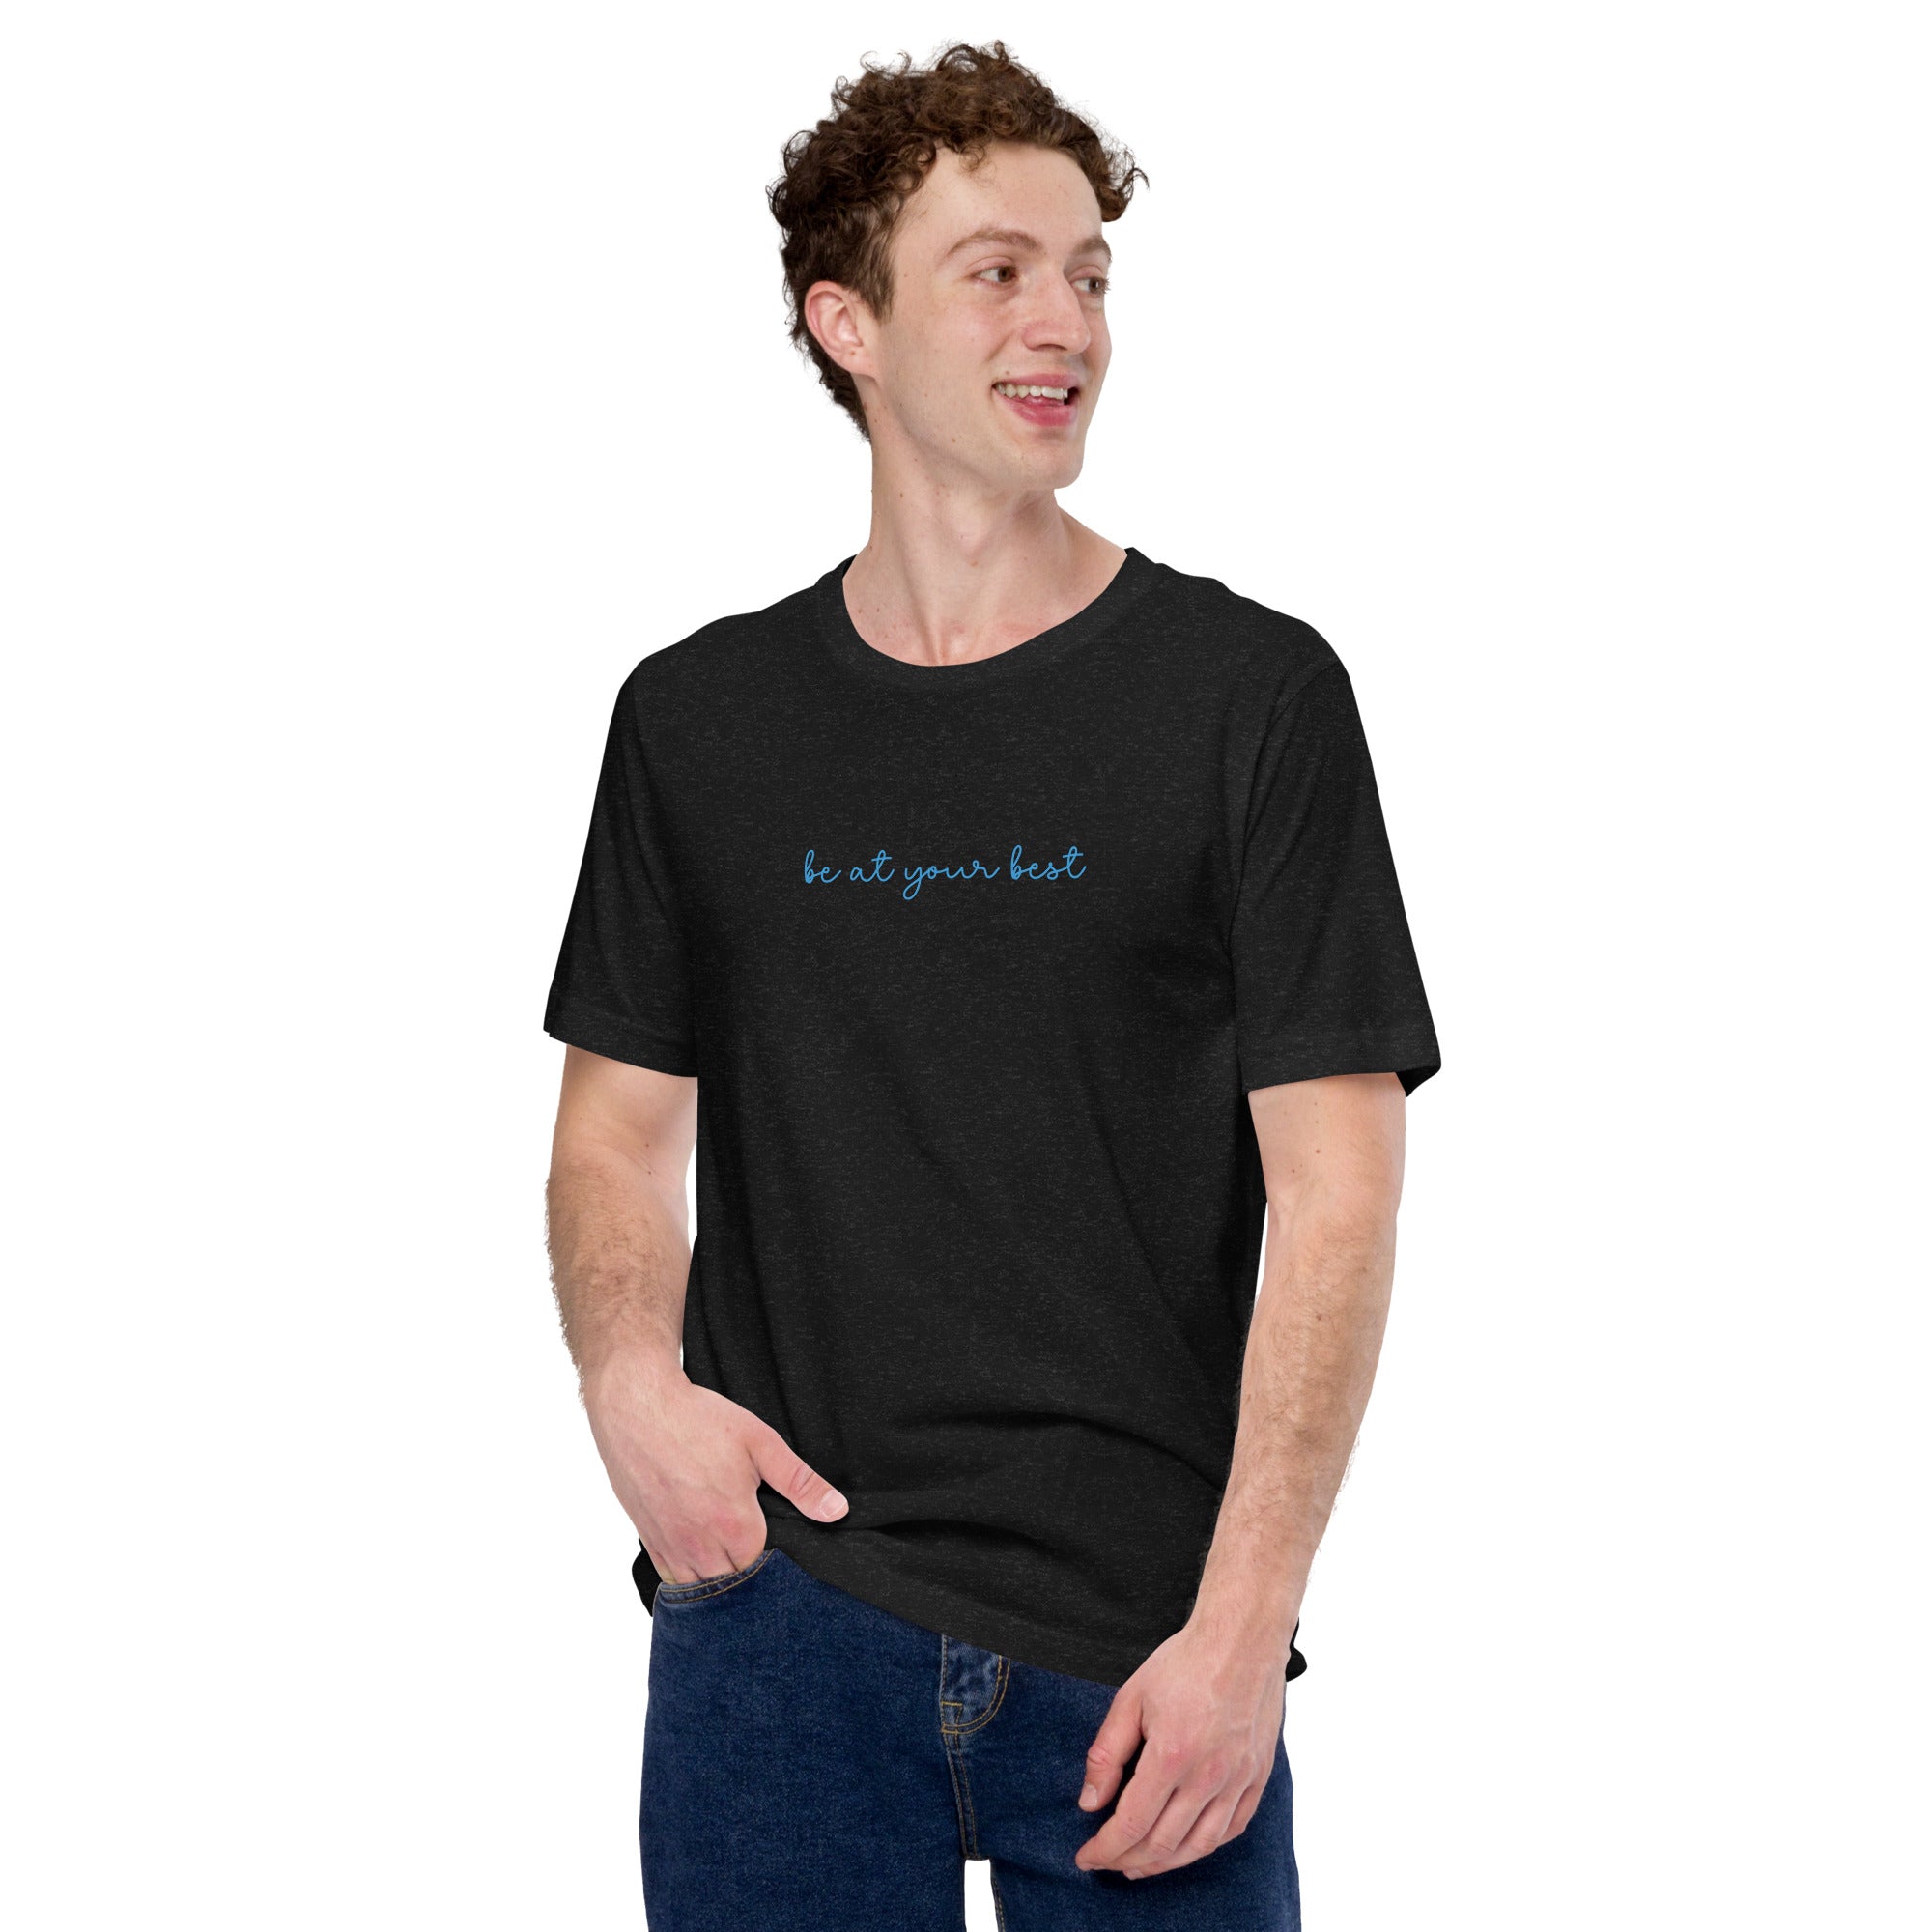 Be Productive, Be At Your Best. Premium Short-Sleeve Unisex T-Shirt | Positive Affirmation Tee